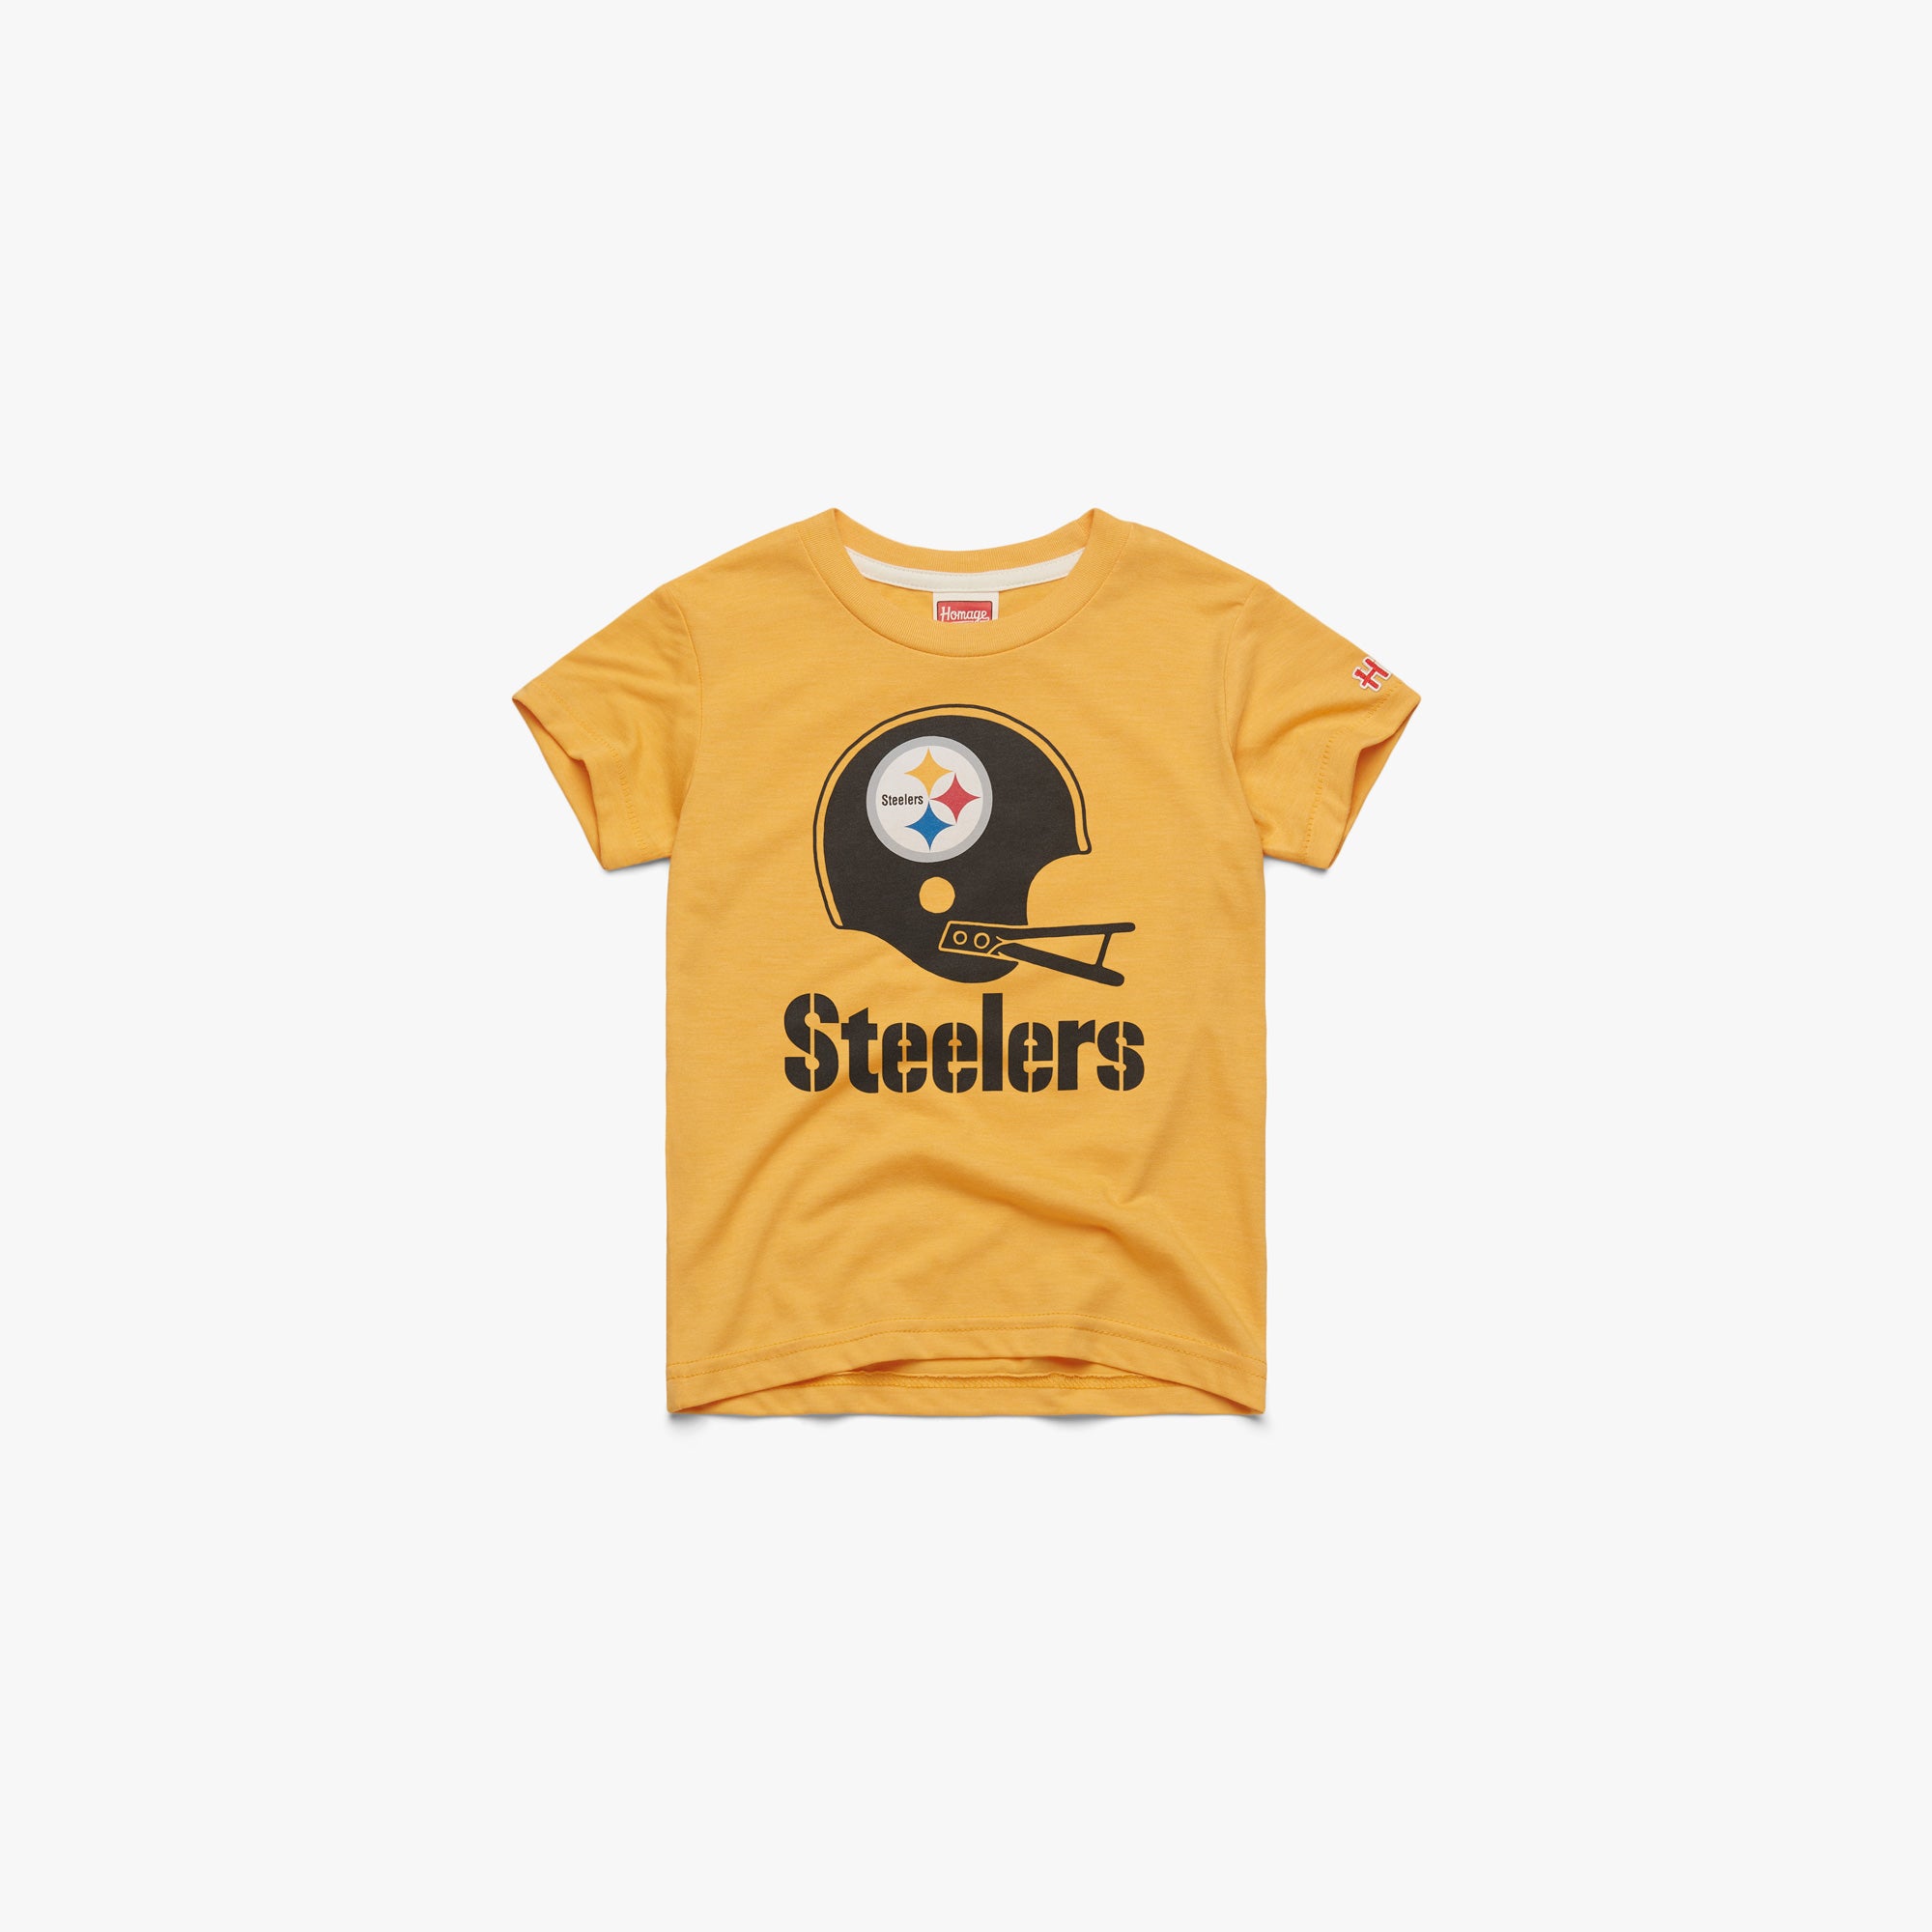 Youth Pittsburgh Steelers Big Helmet Youth T-Shirt from Homage. | Officially Licensed Vintage NFL Apparel from Homage Pro Shop.